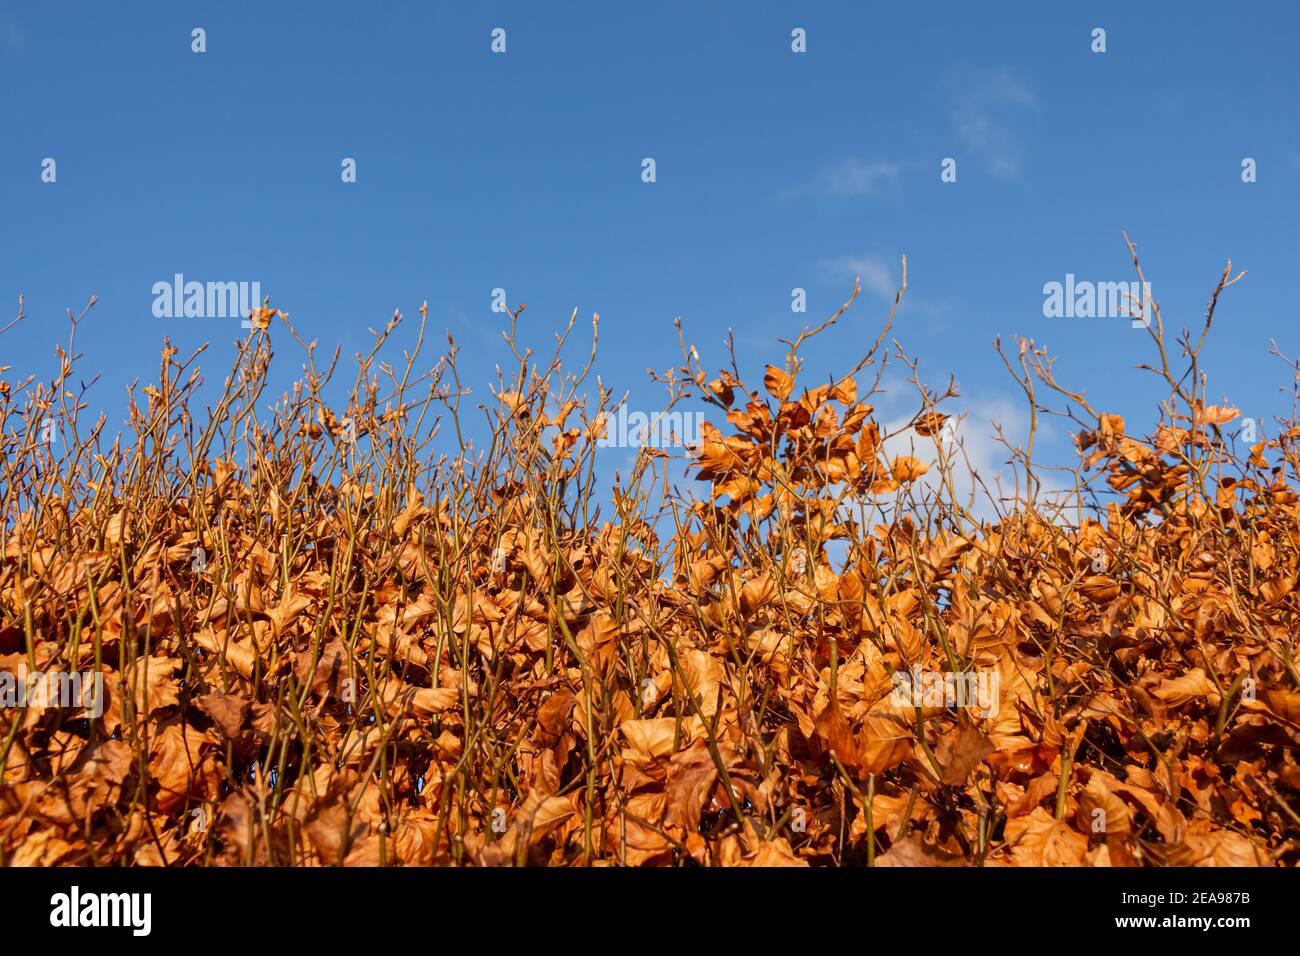 A beech hedge in fall or autumn colours contrasting with a bright blue sky Stock Photo